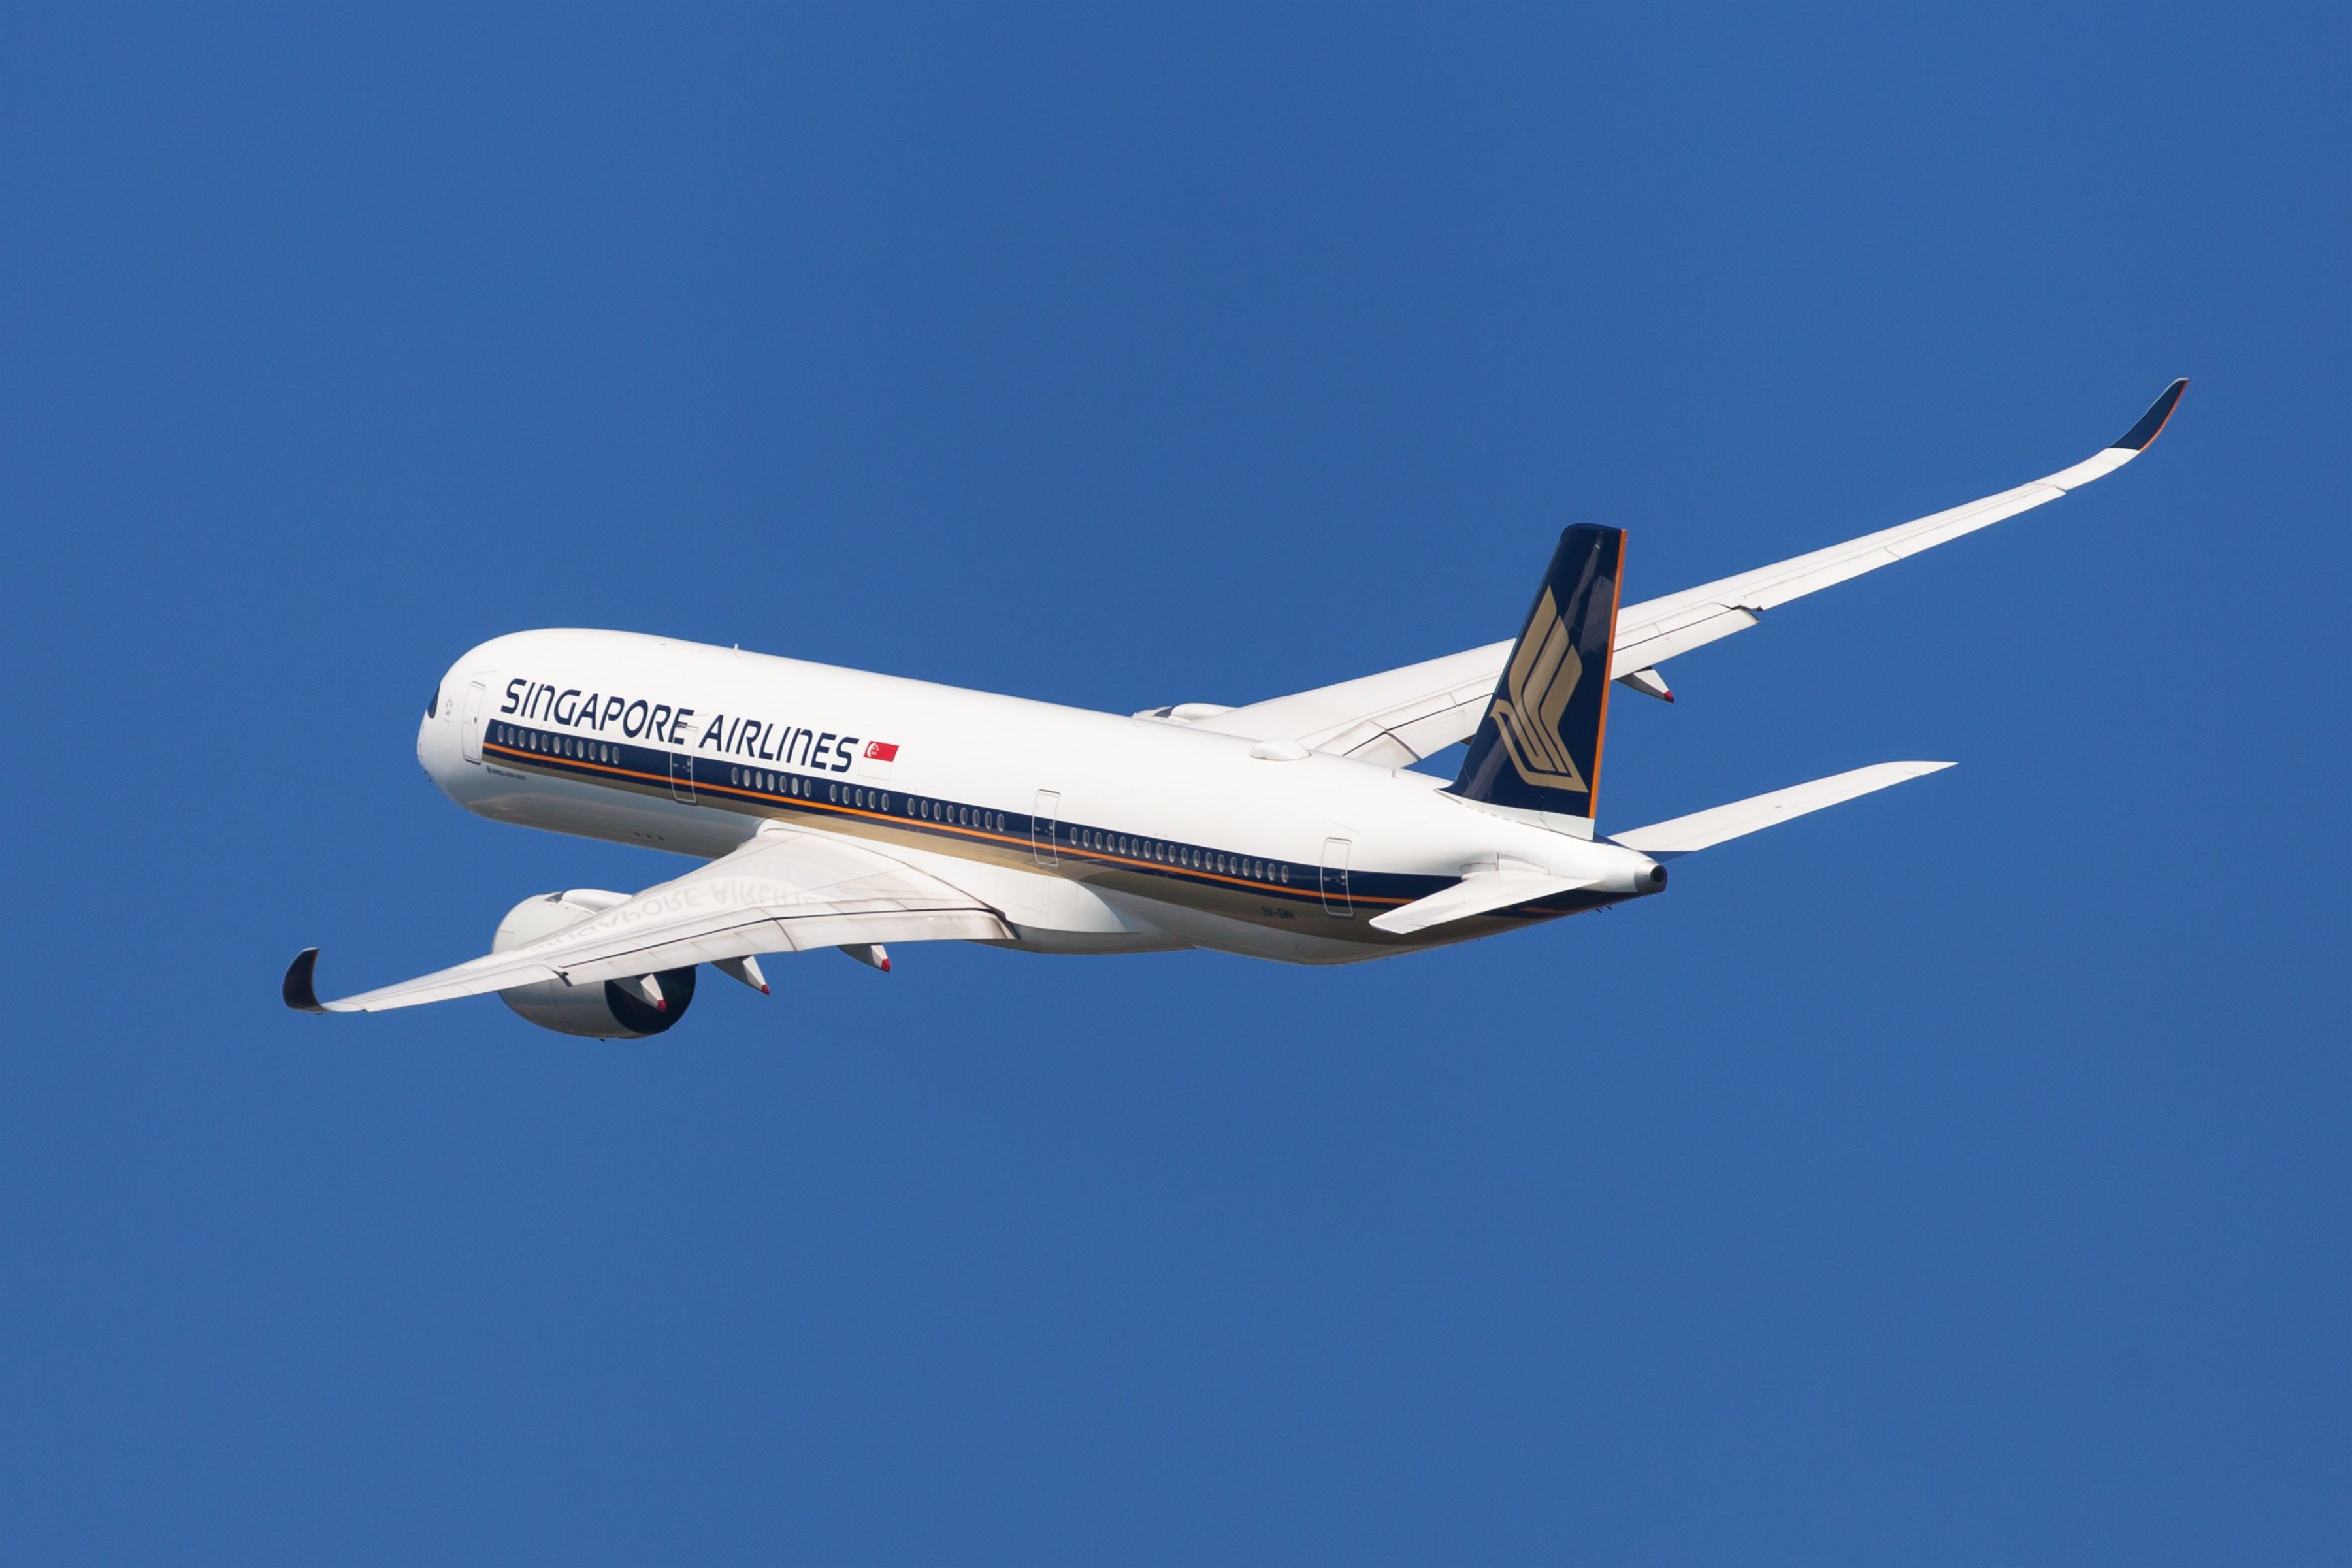 A Singapore Airlines A350-900 flying in the sky.